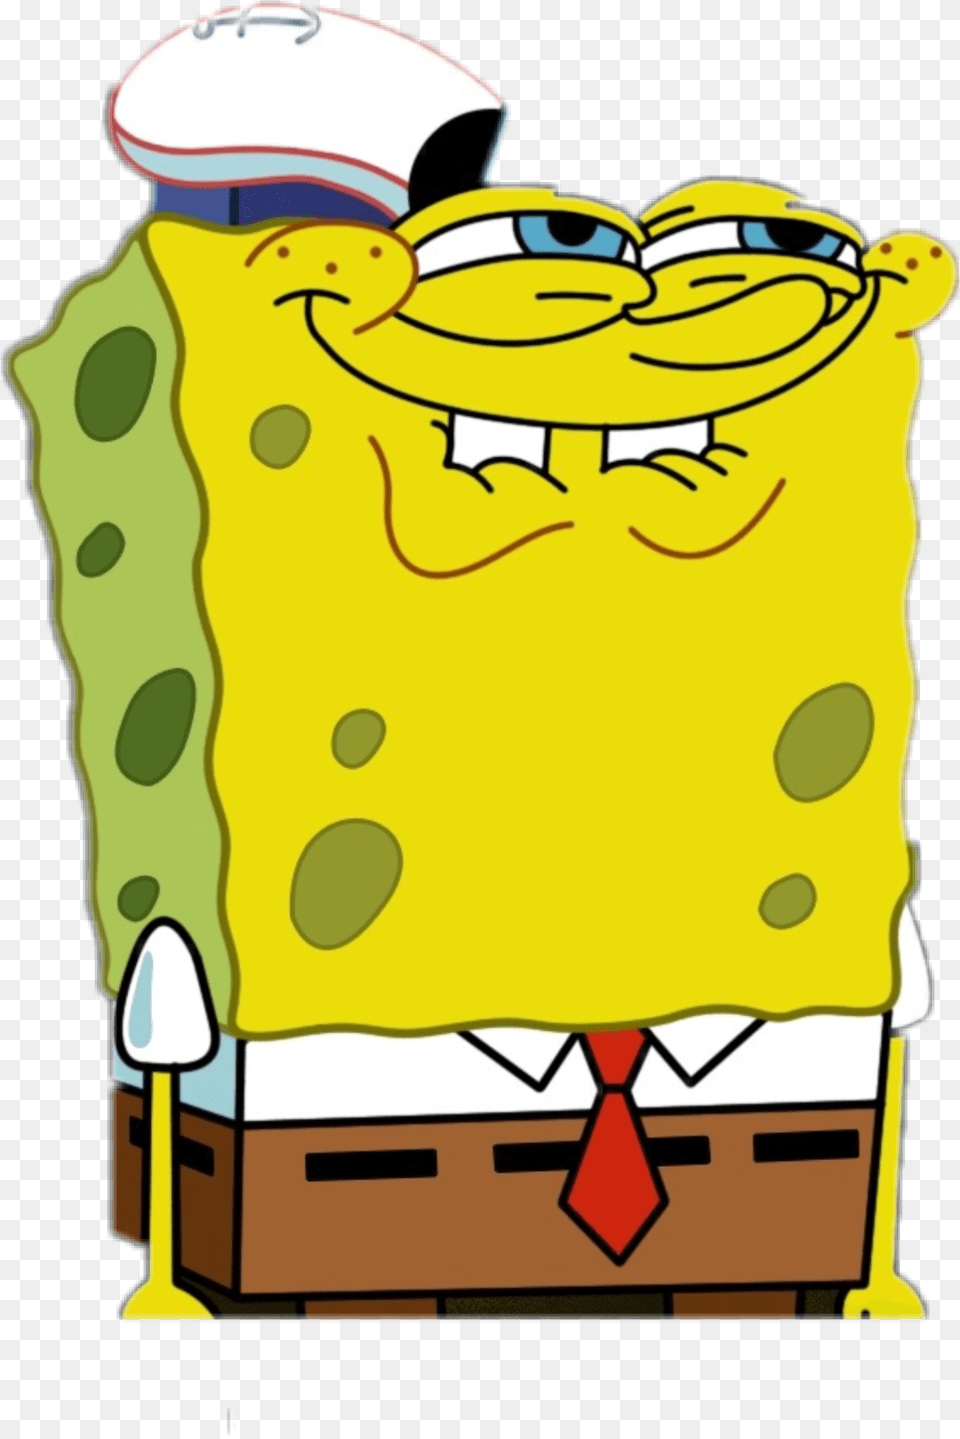 My New Profile Picture Xd Iphone Spongebob, Cartoon, Baby, Person Png Image